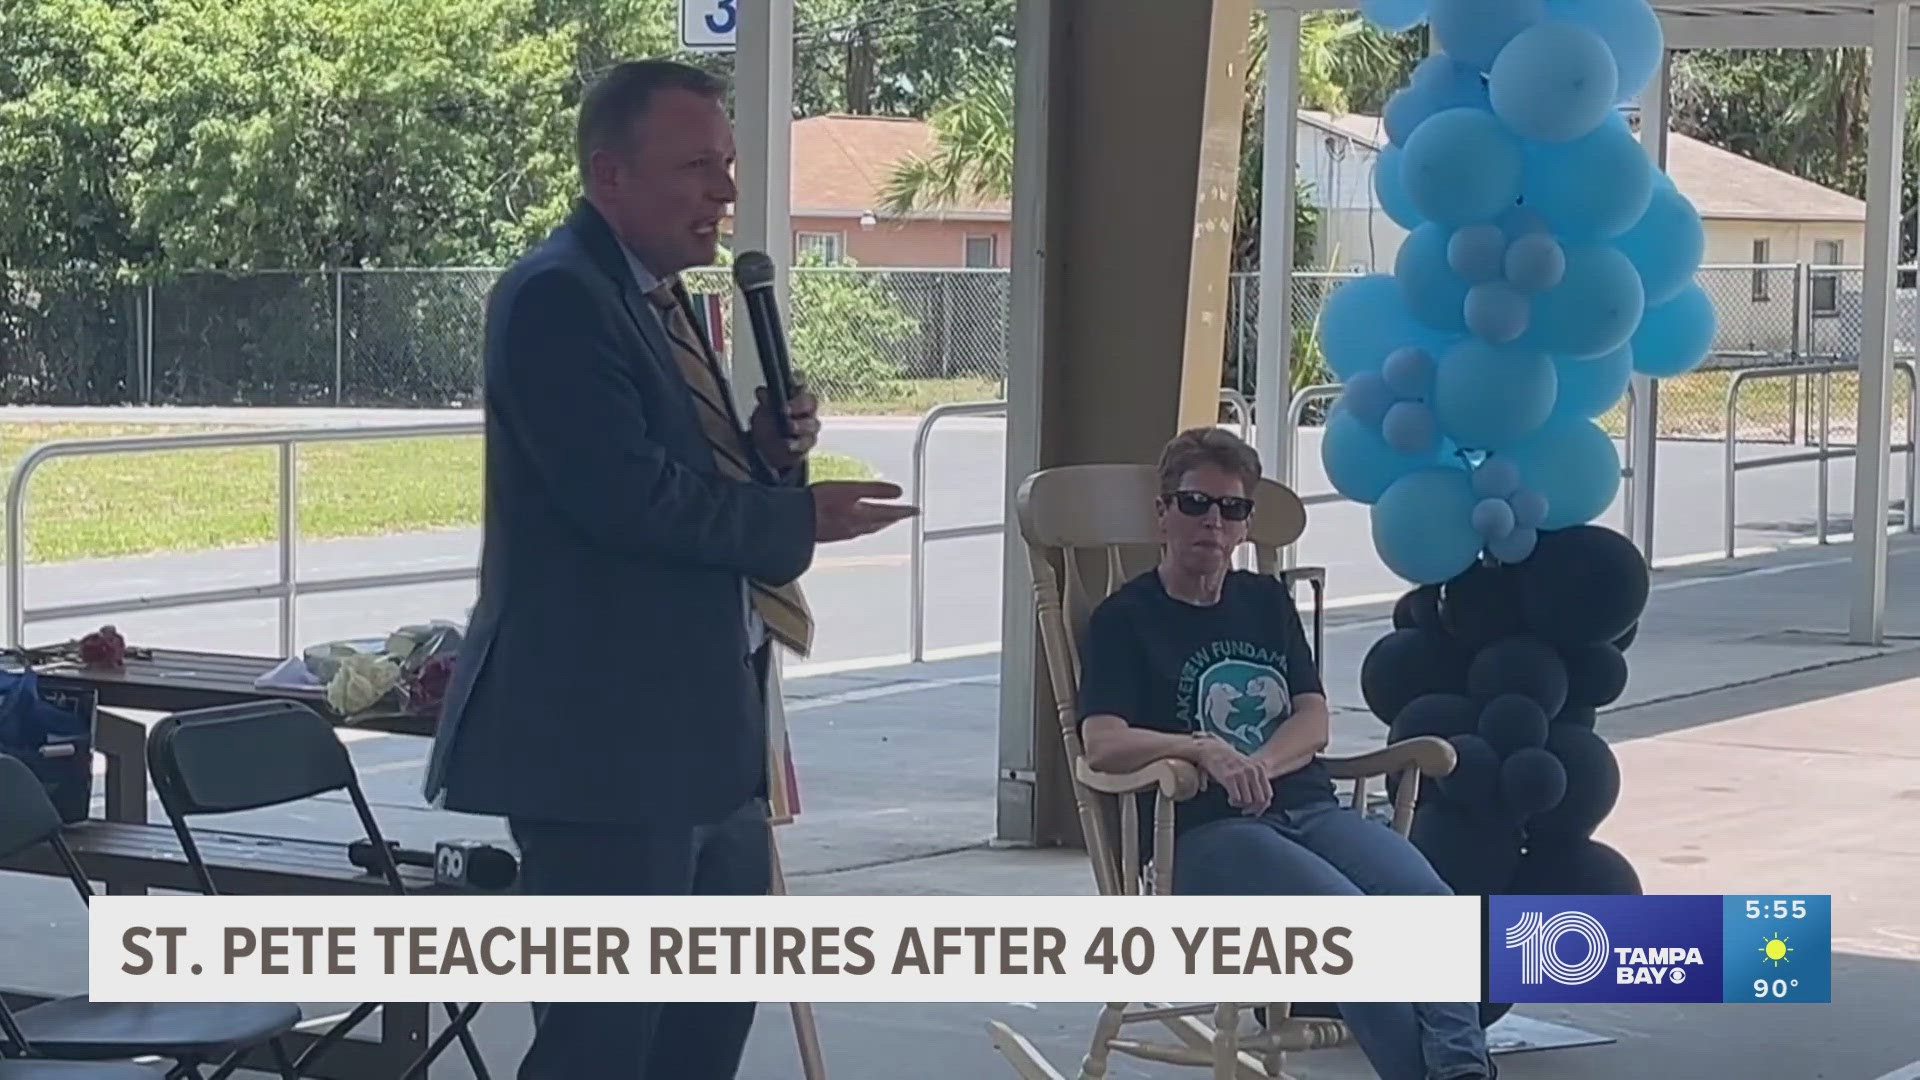 The school she teaches at held a surprise celebration for her.